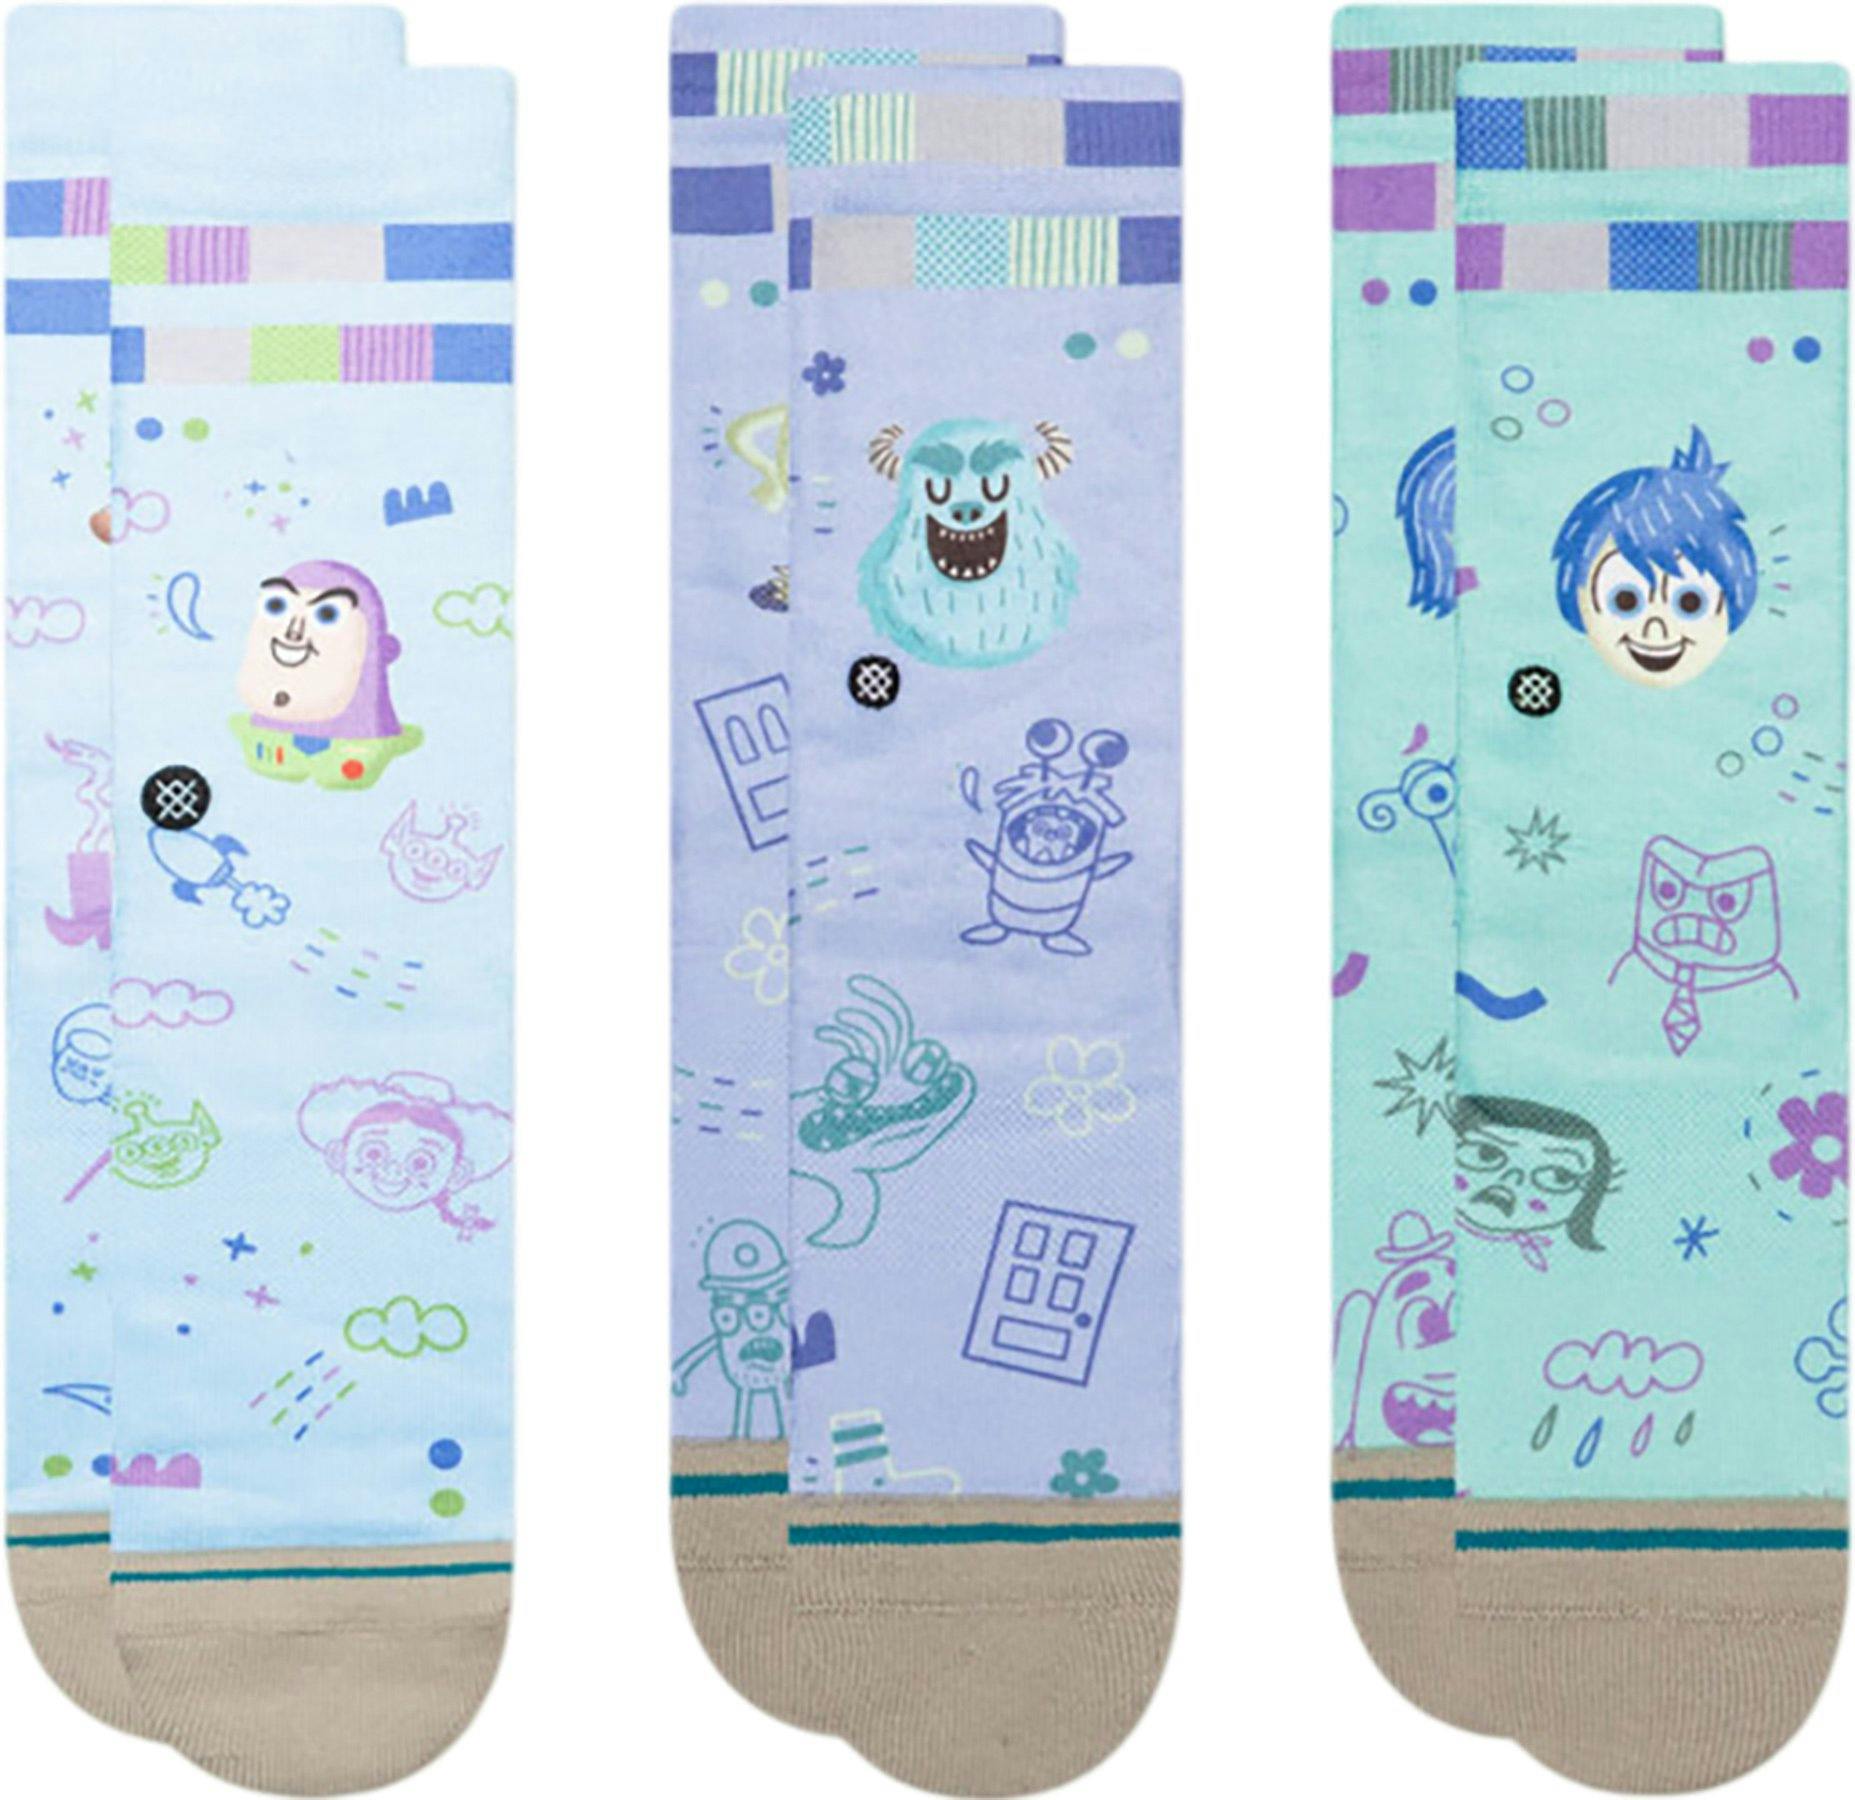 Product image for Pixar X Stance by Ryan Bubnis Poly 3 Pack Crew Socks - Kids